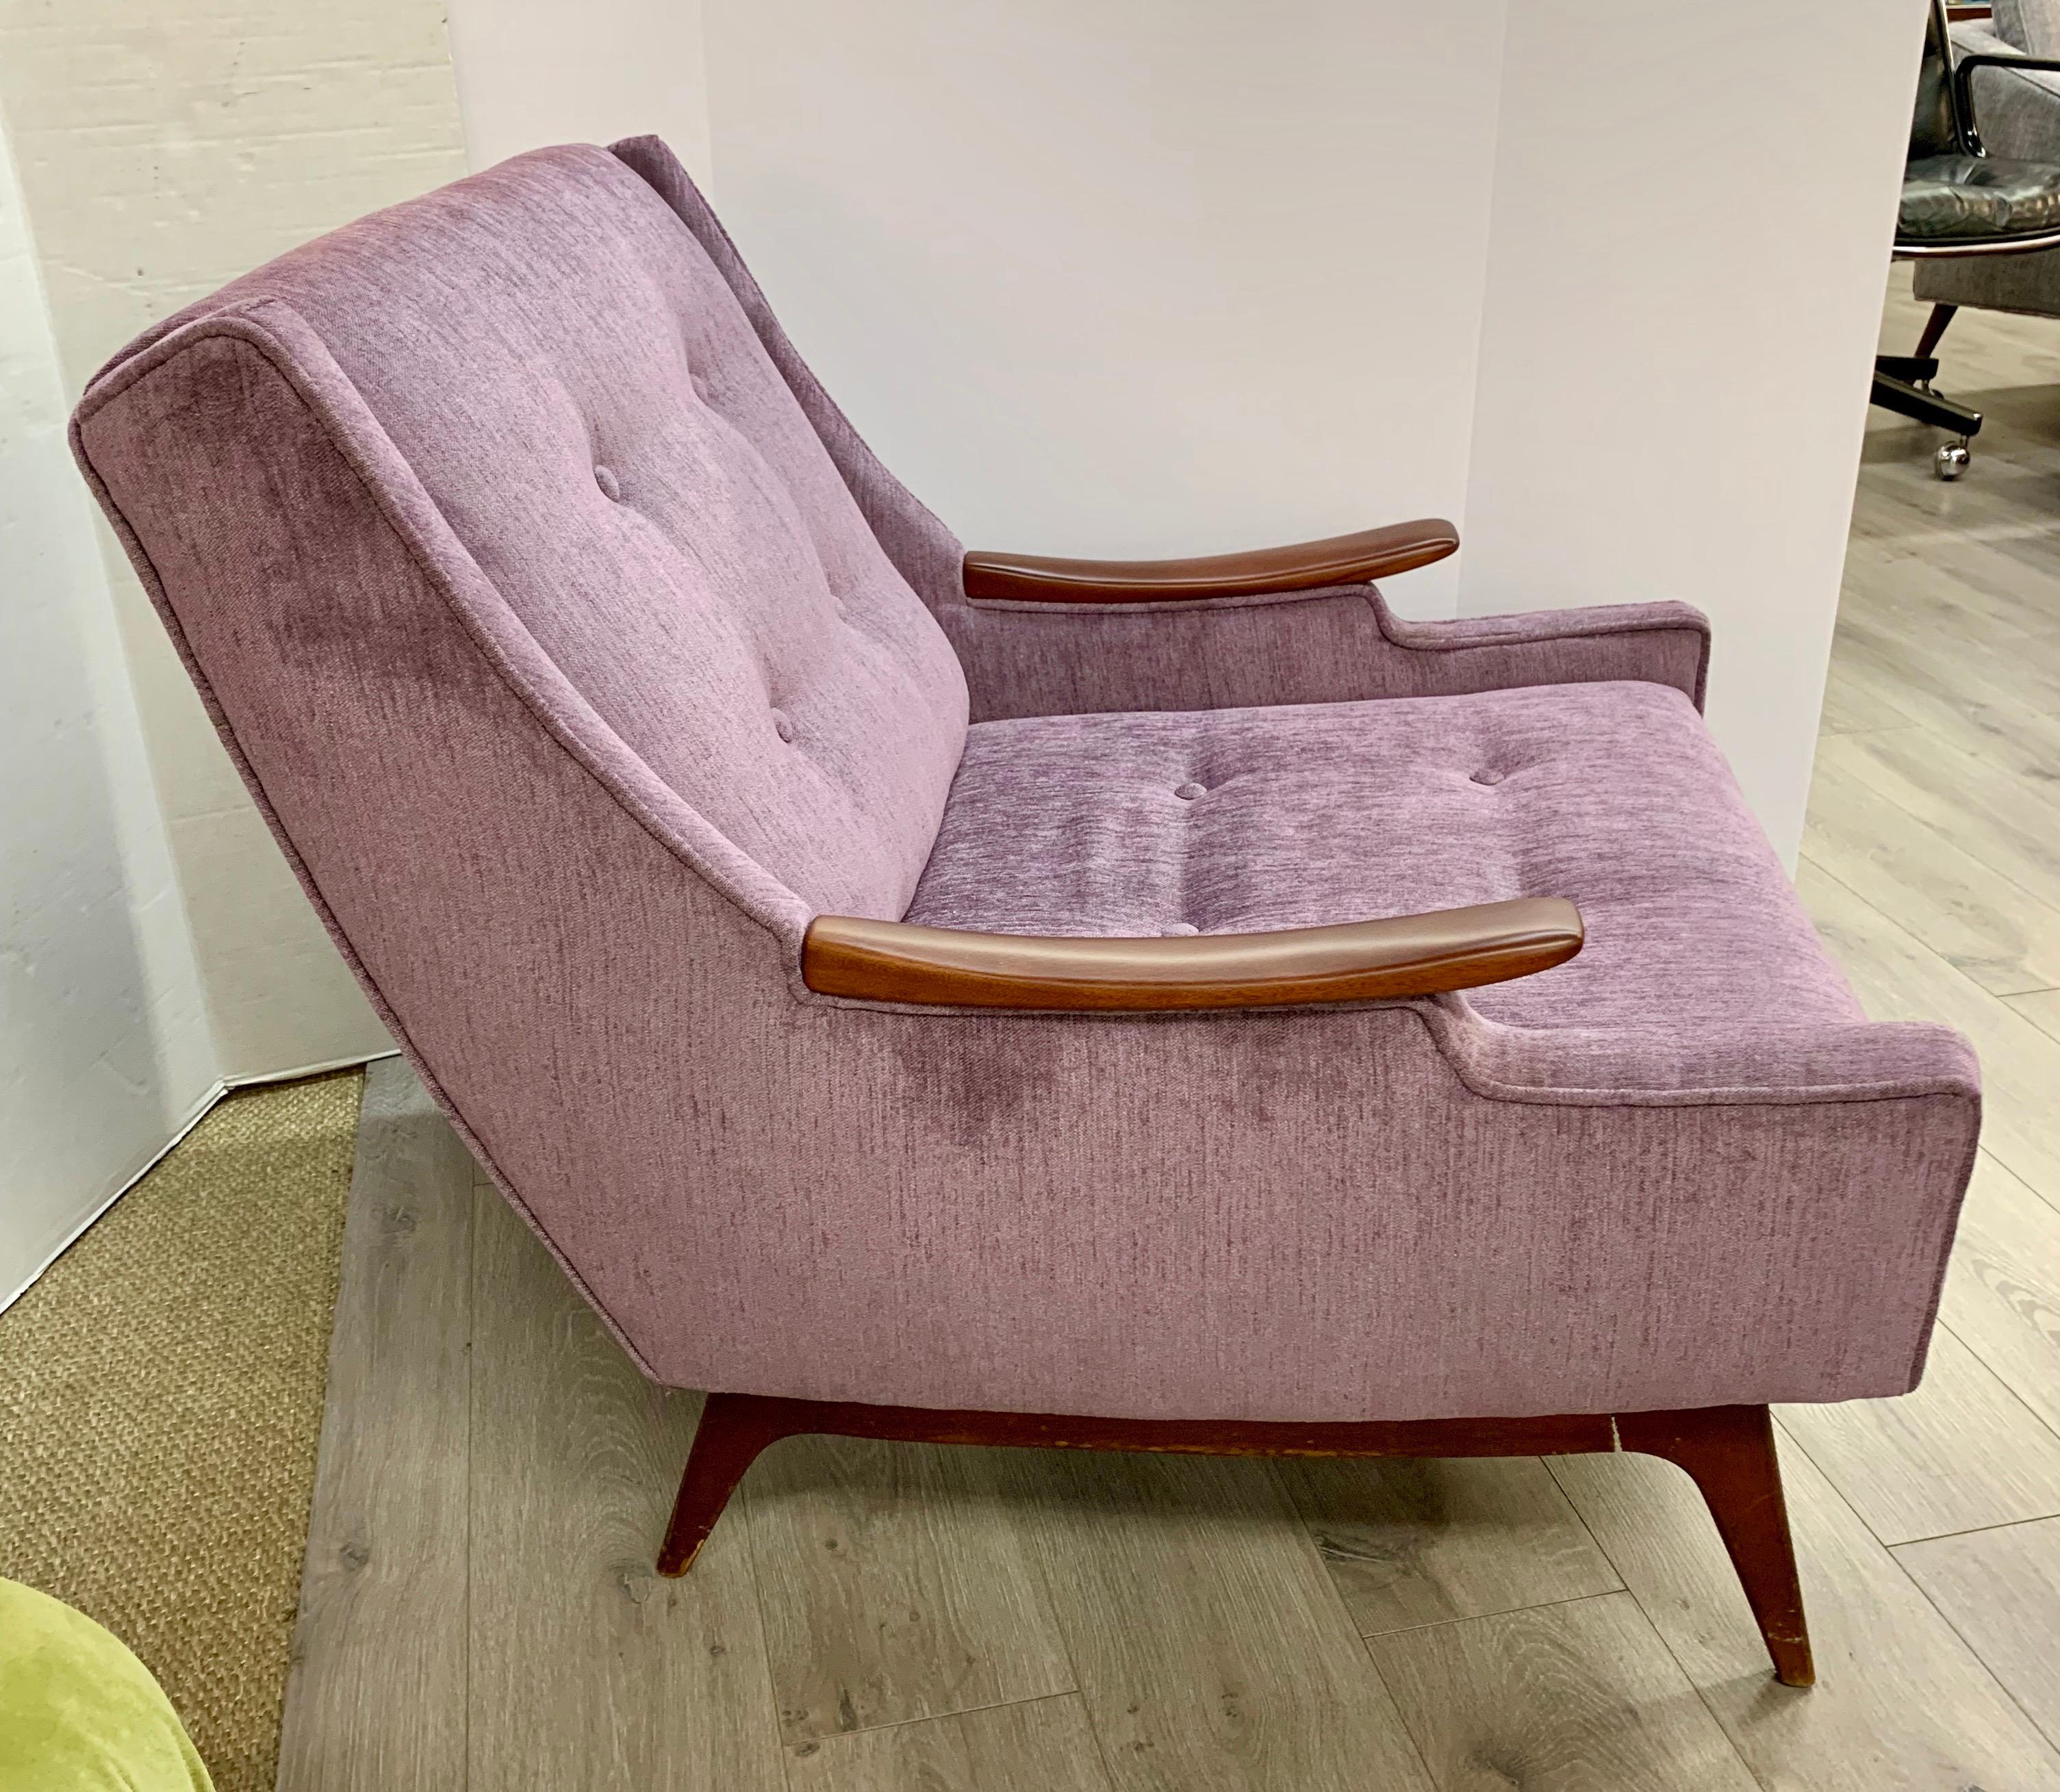 Elegant Mid-Century Modern period lounge chair done in newer lavender fabric that features tufting at backrest and seat. Iconic in every way!